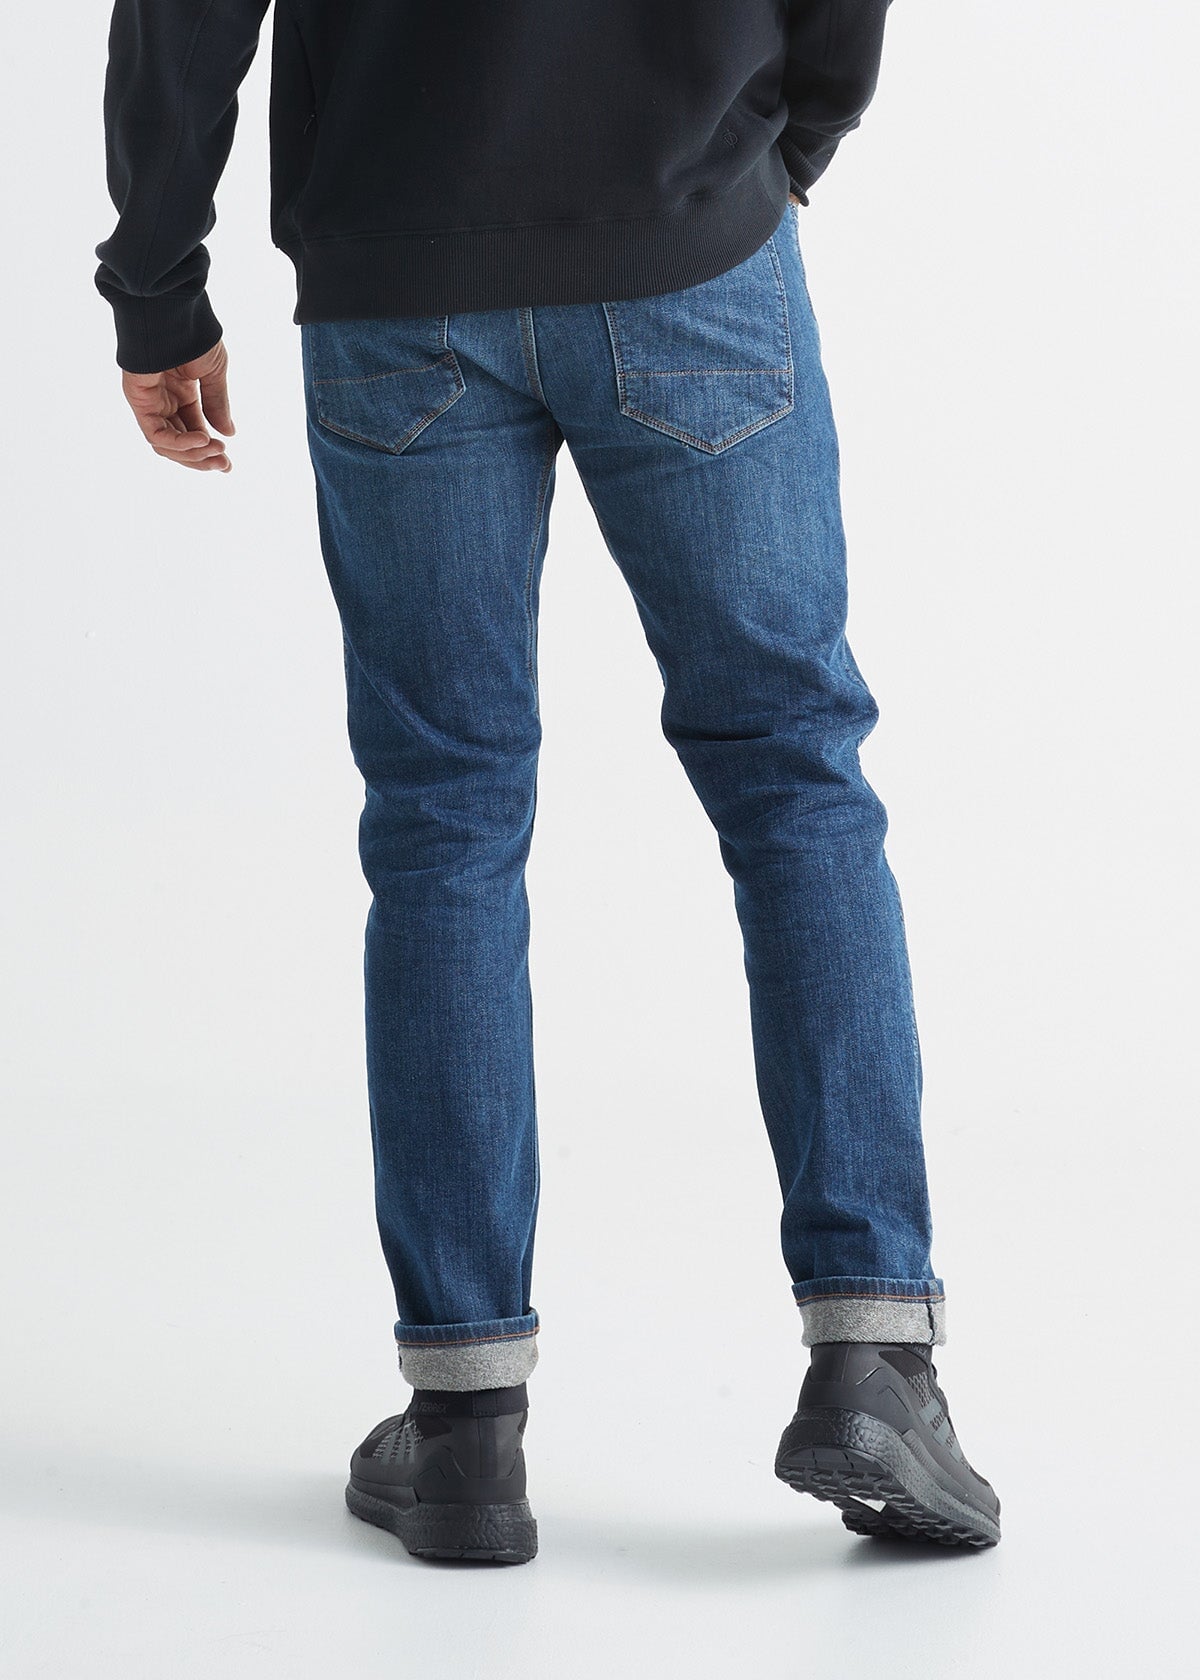 Hammer's - Sevierville - Men's fleece lined pants and jeans! Only $14.95!  Hurry in this weekend!